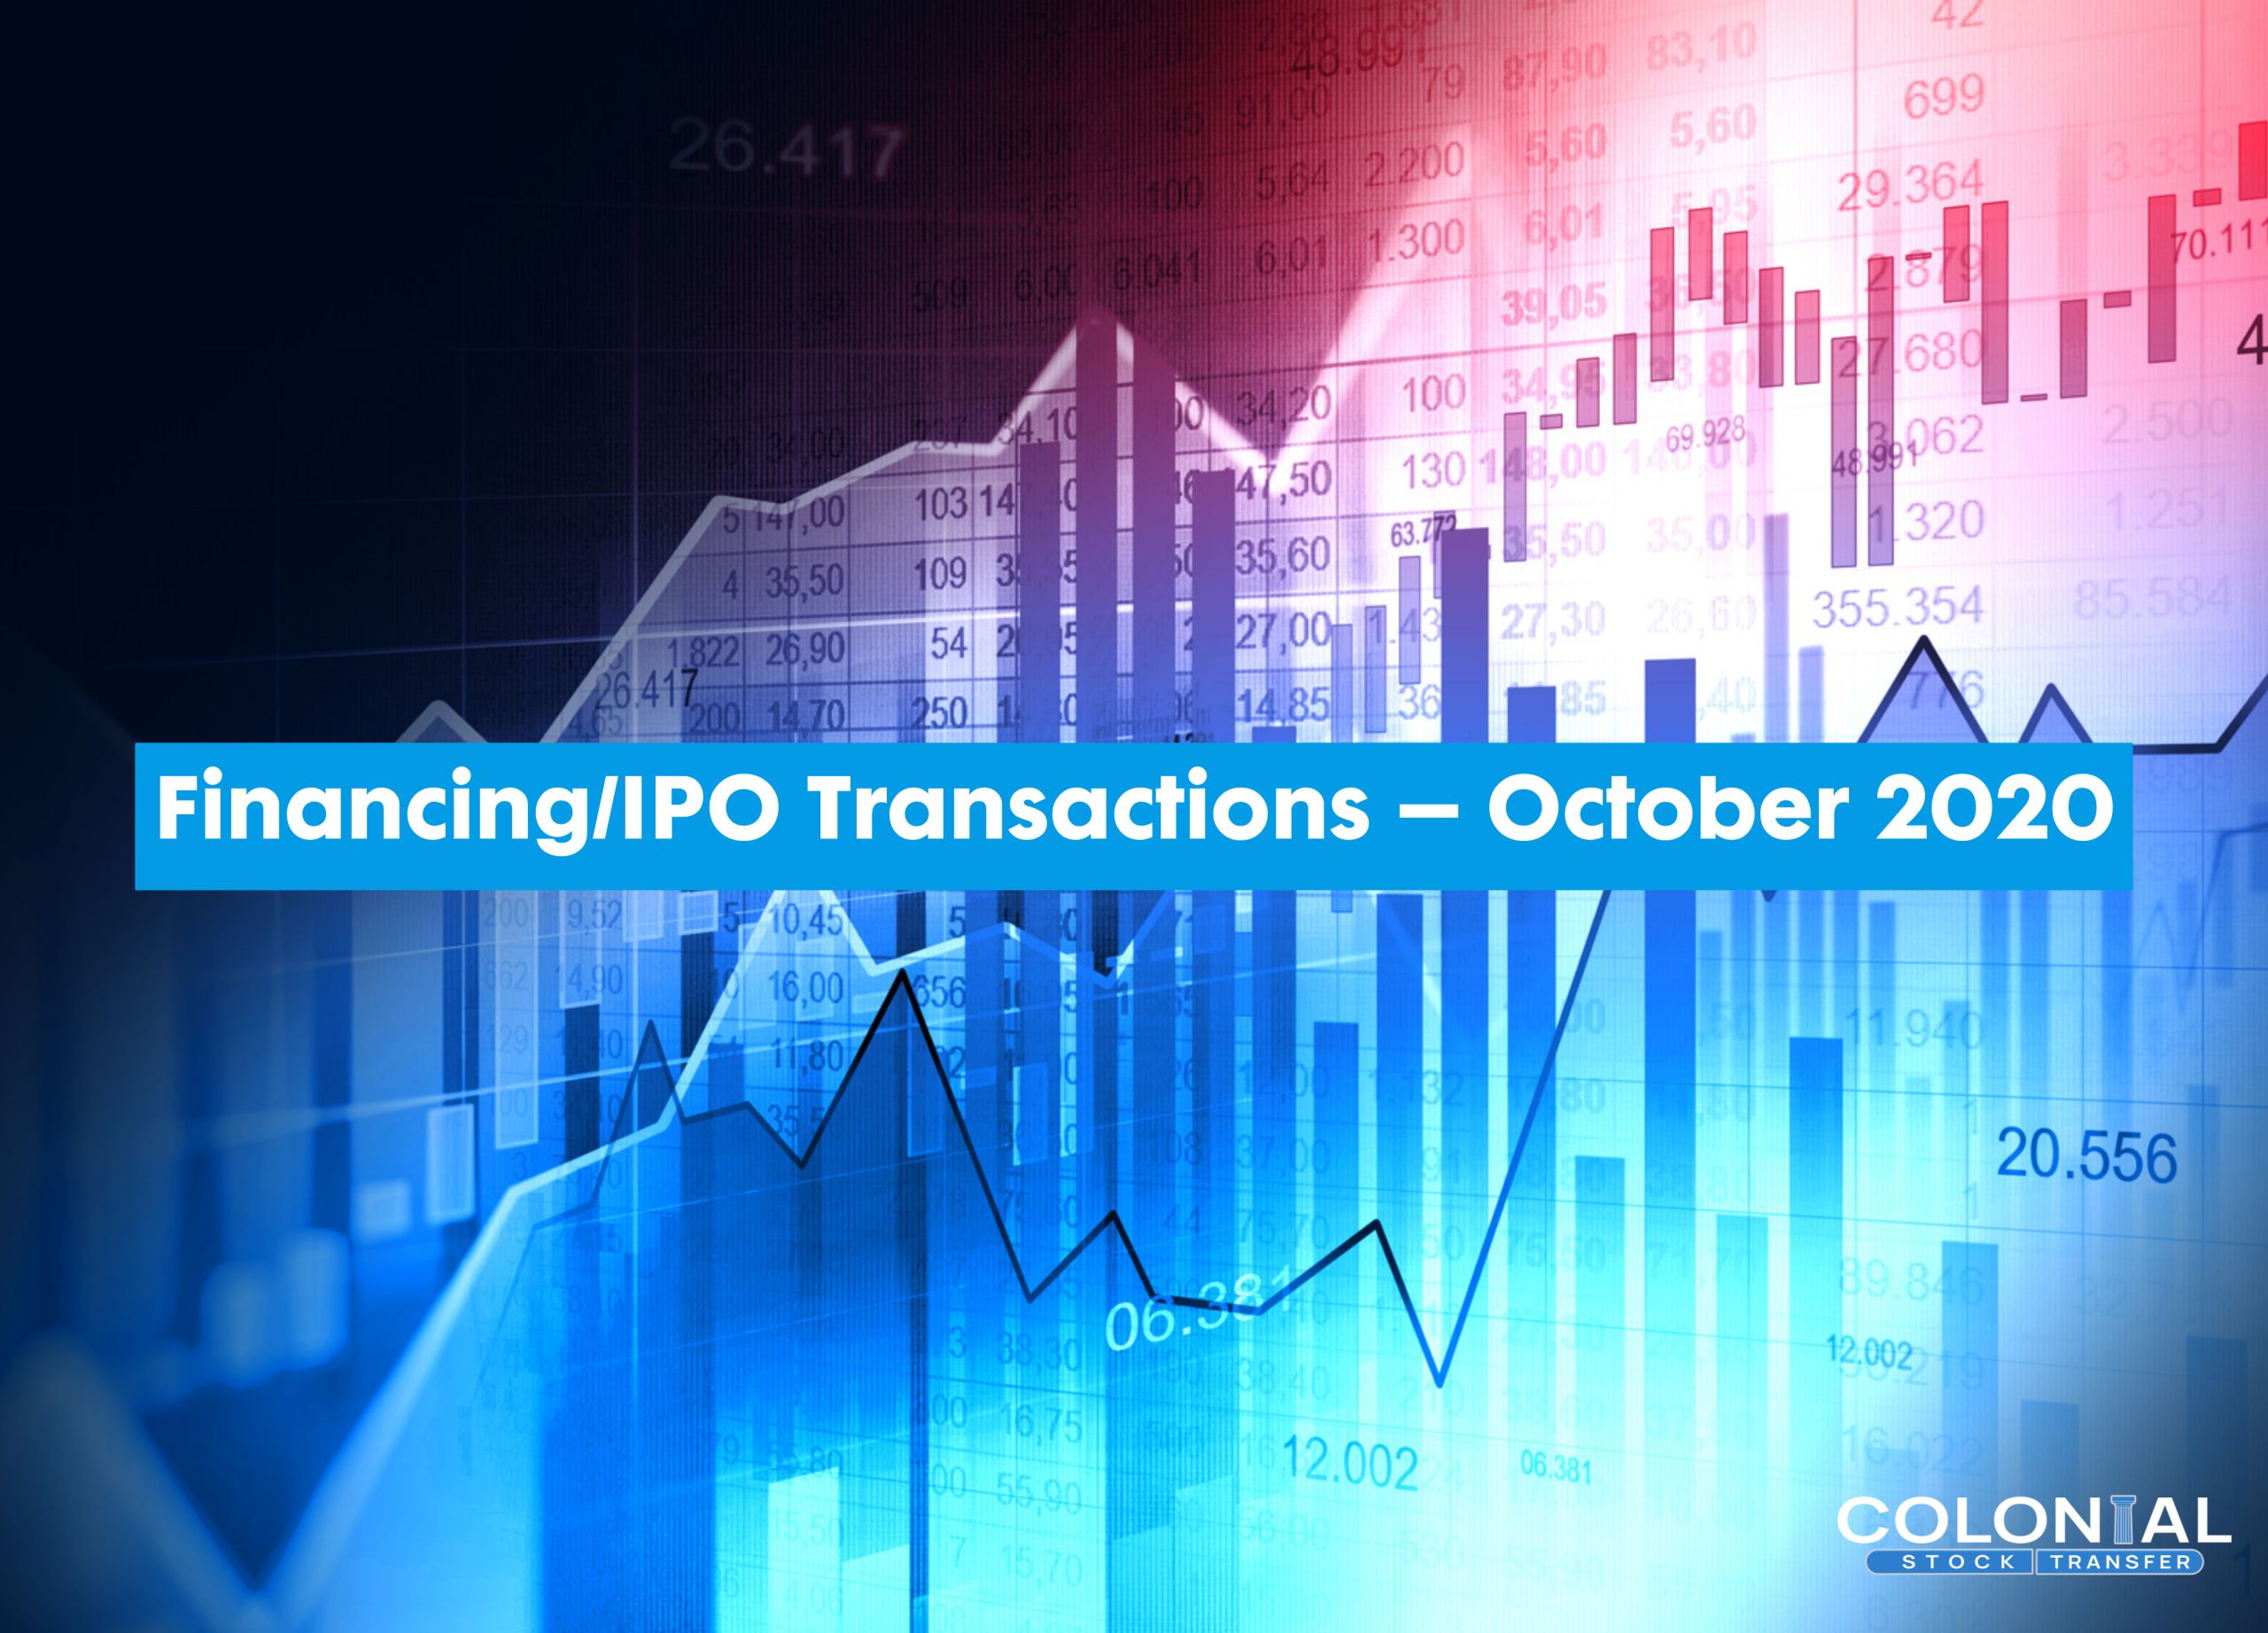 Financing/IPO Transactions – October 2020